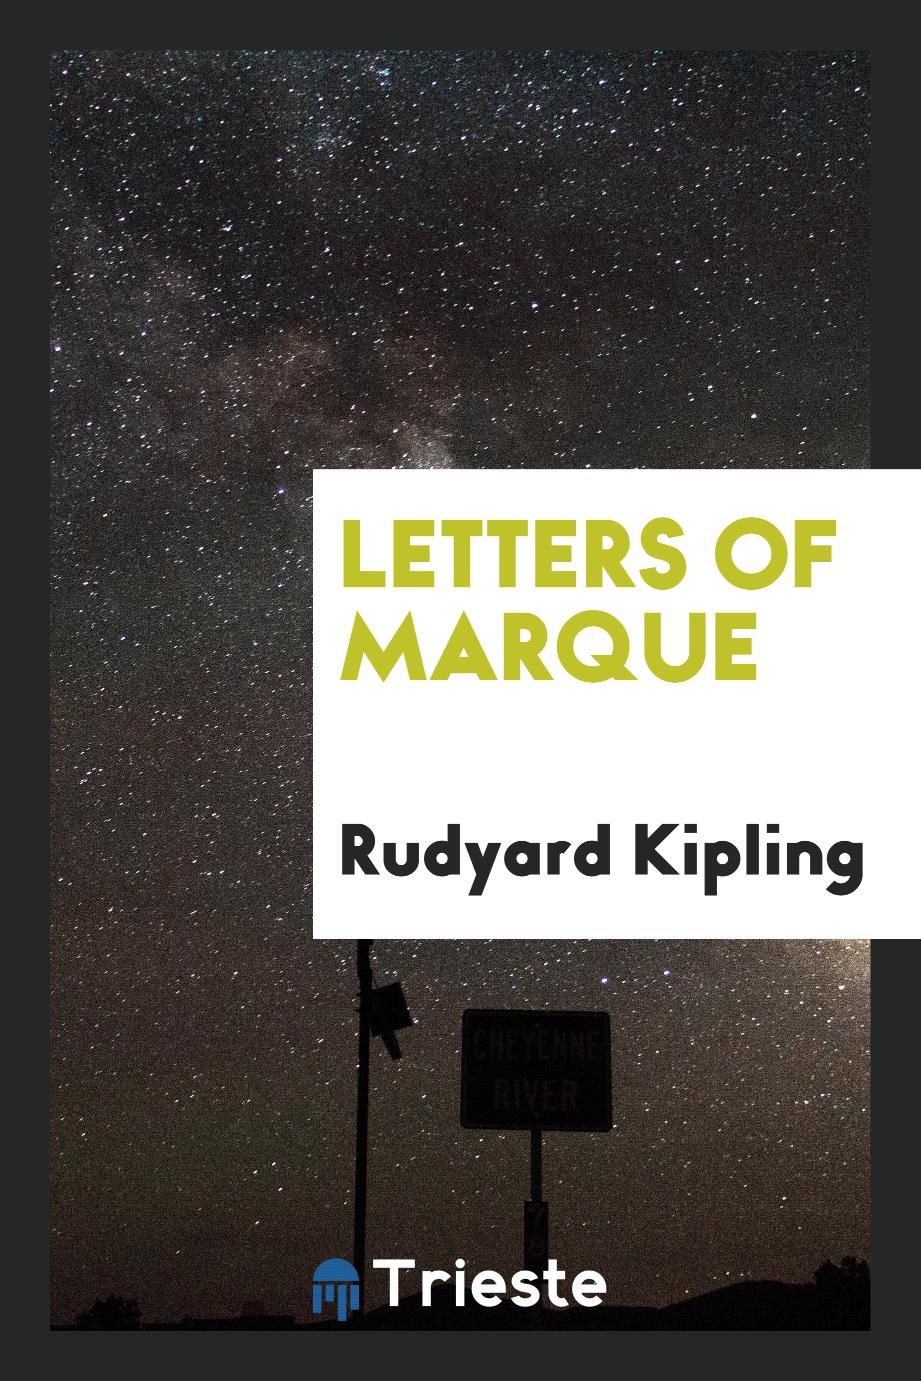 Letters of marque